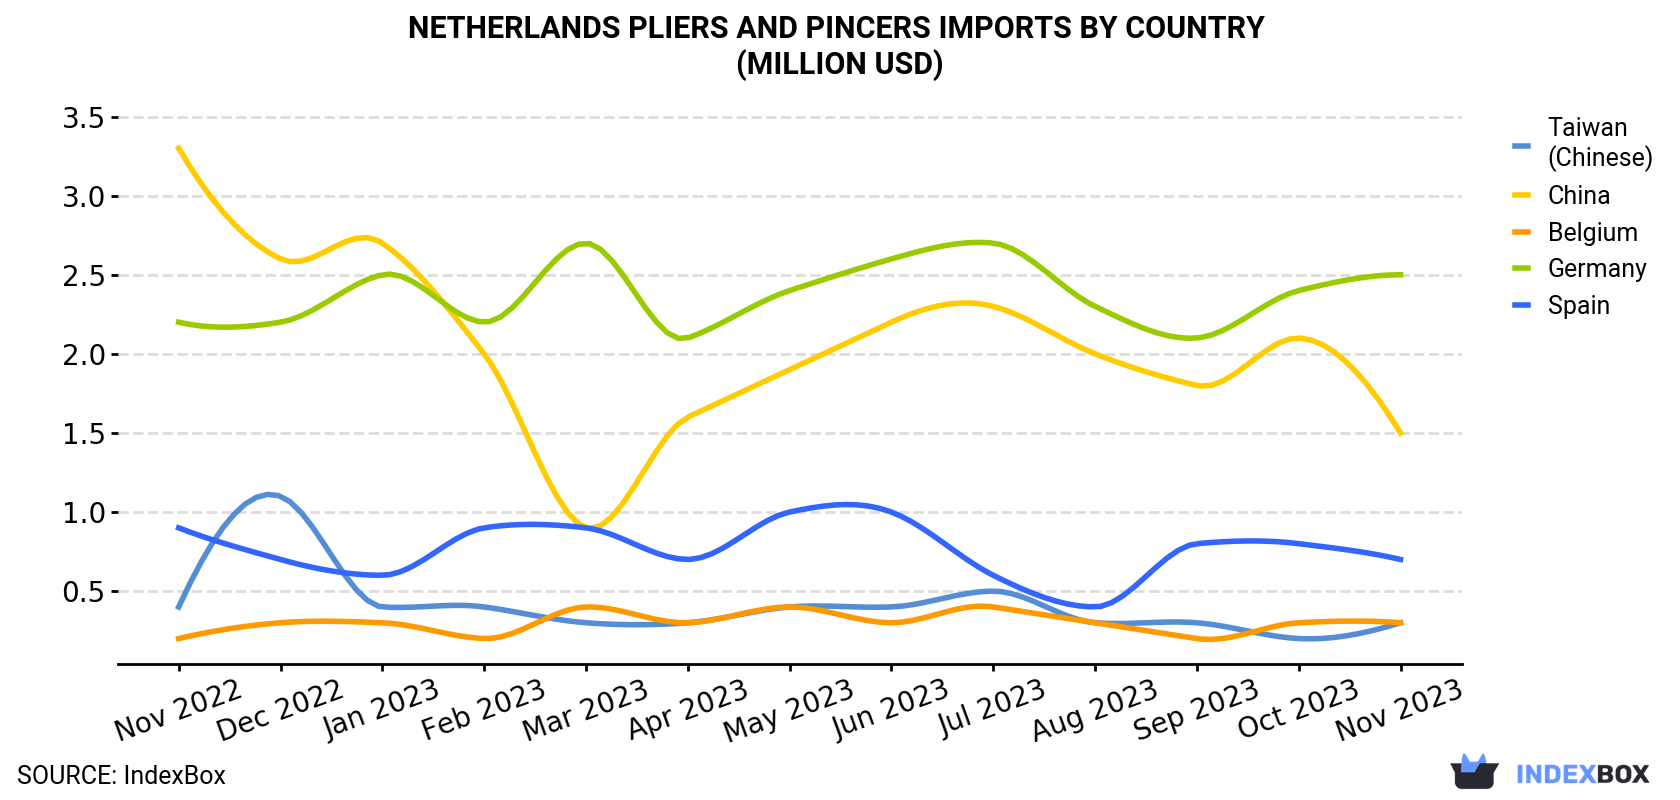 Netherlands Pliers And Pincers Imports By Country (Million USD)